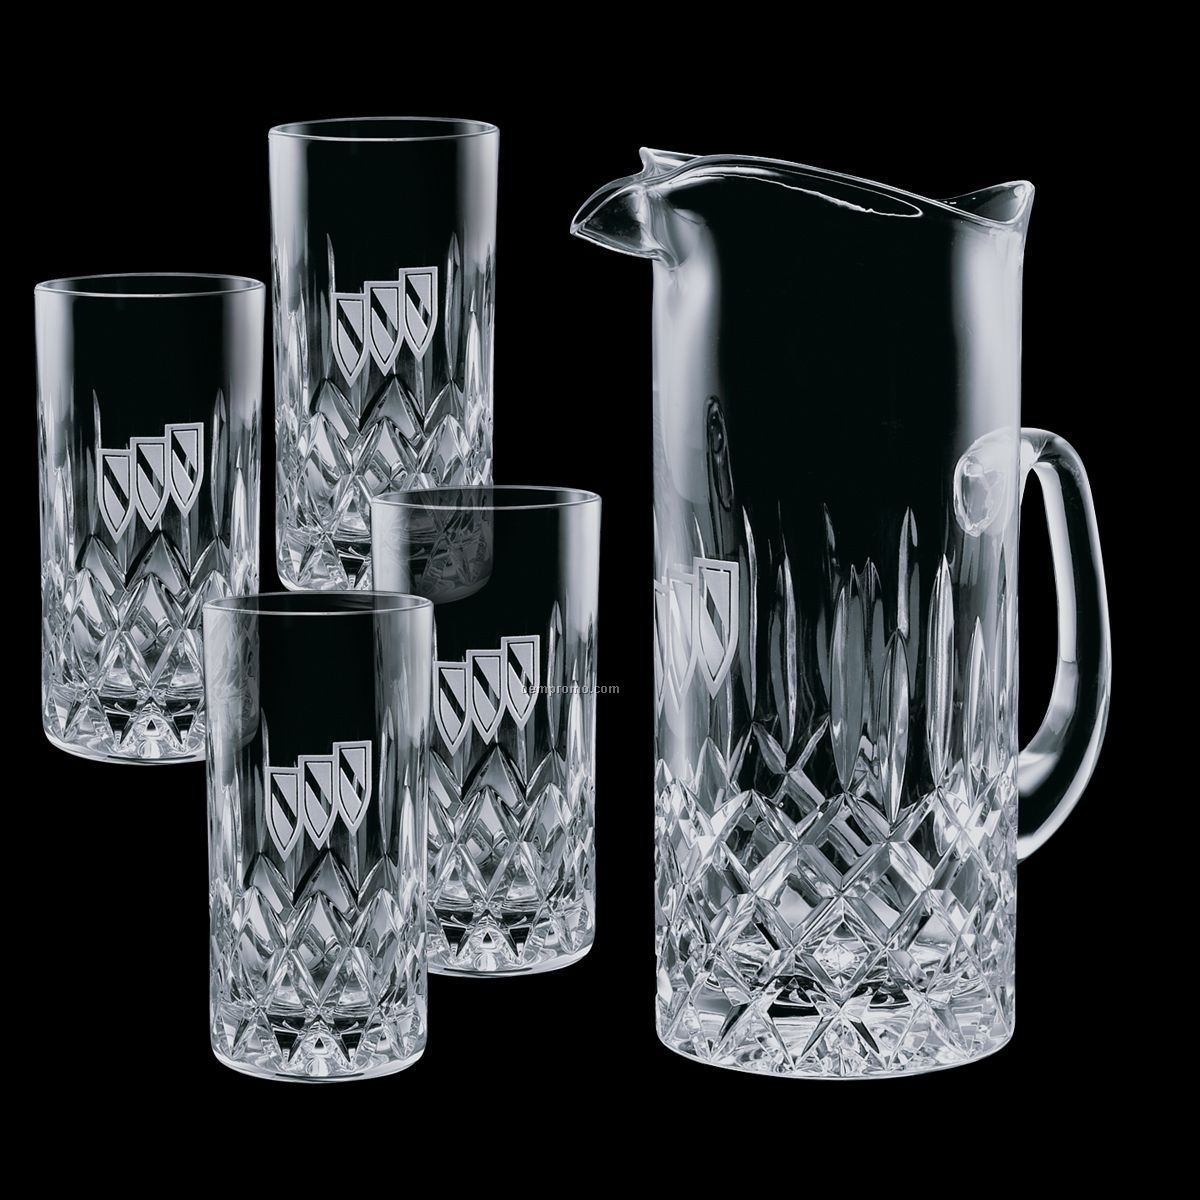 30 Oz. Crystal Denby Pitcher With 4 Hiball Glasses